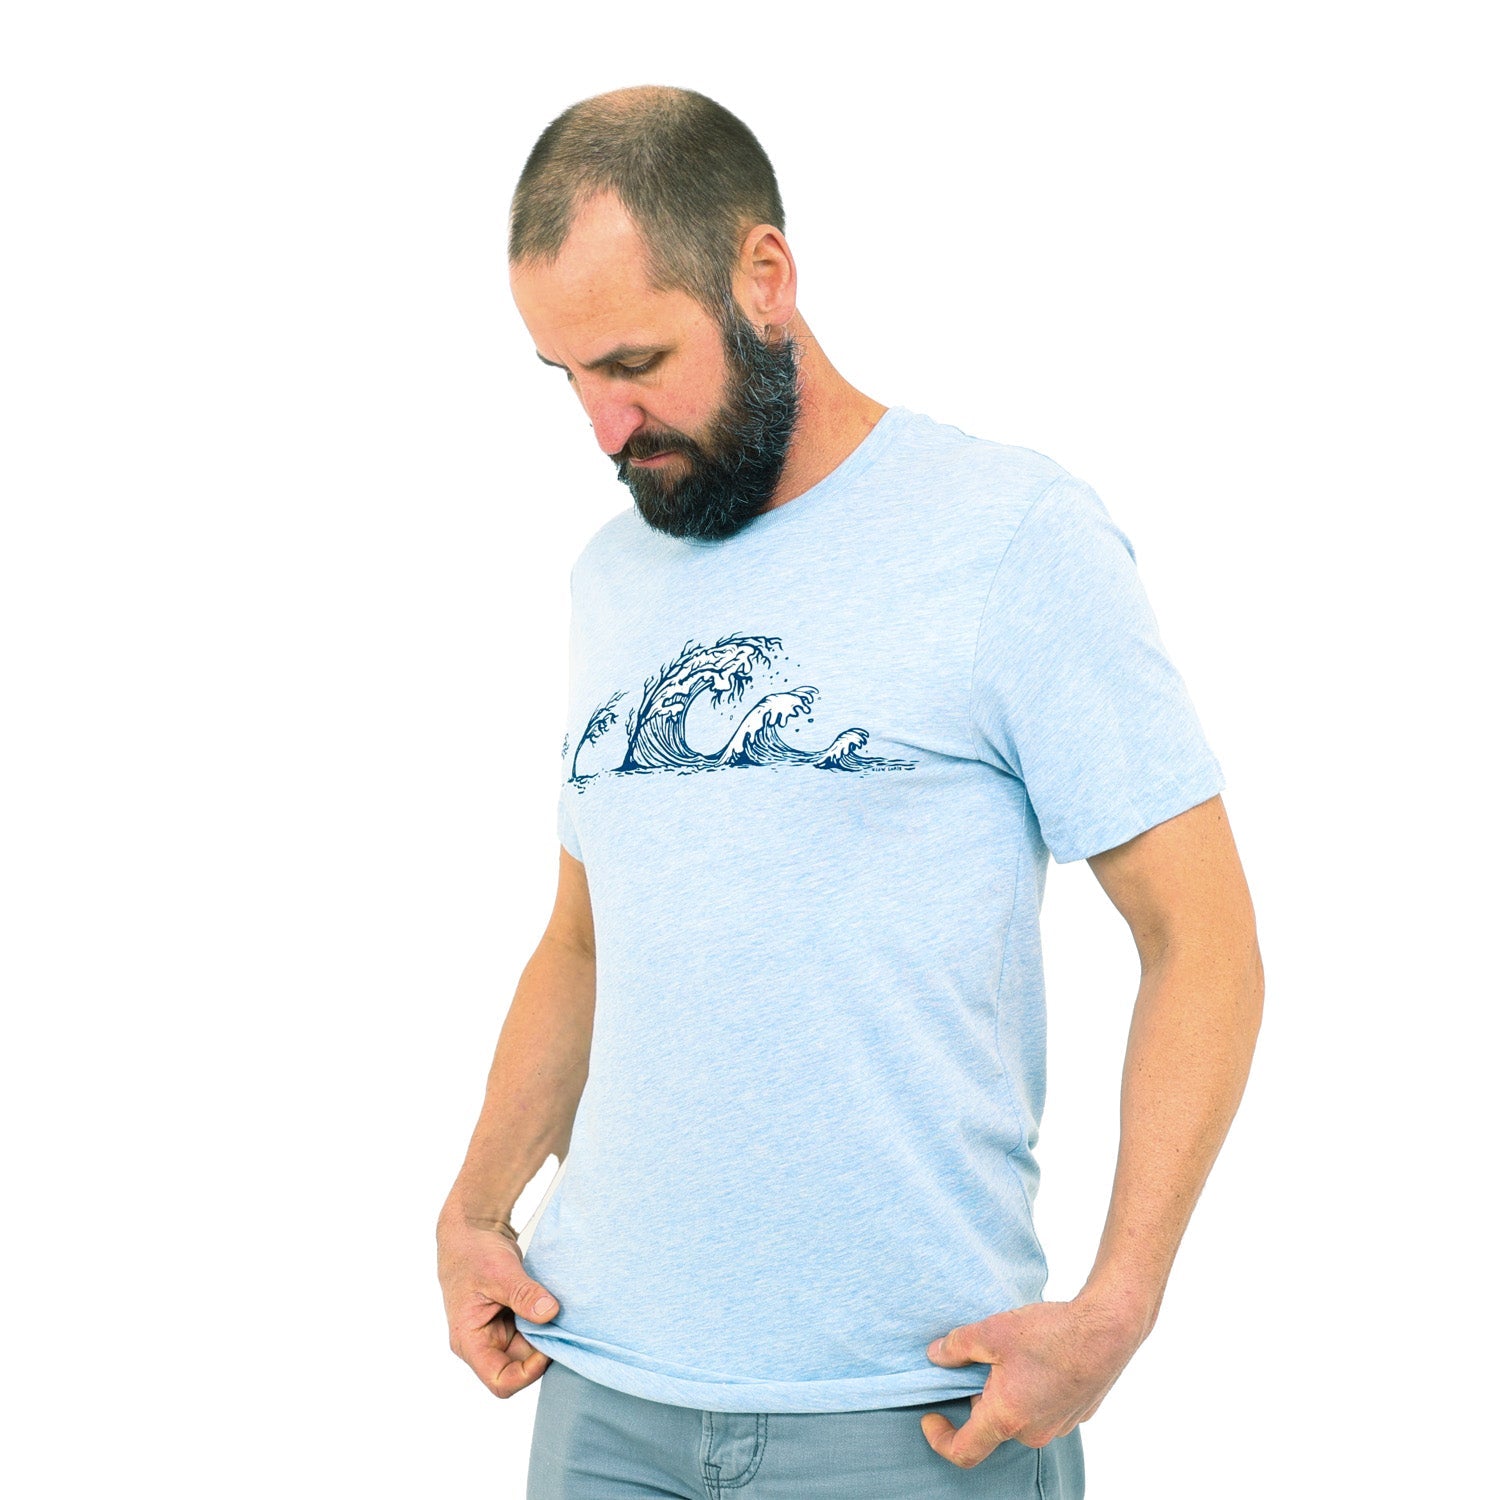 Man wearing light blue t-shirt with trees turning into waves across the chest.